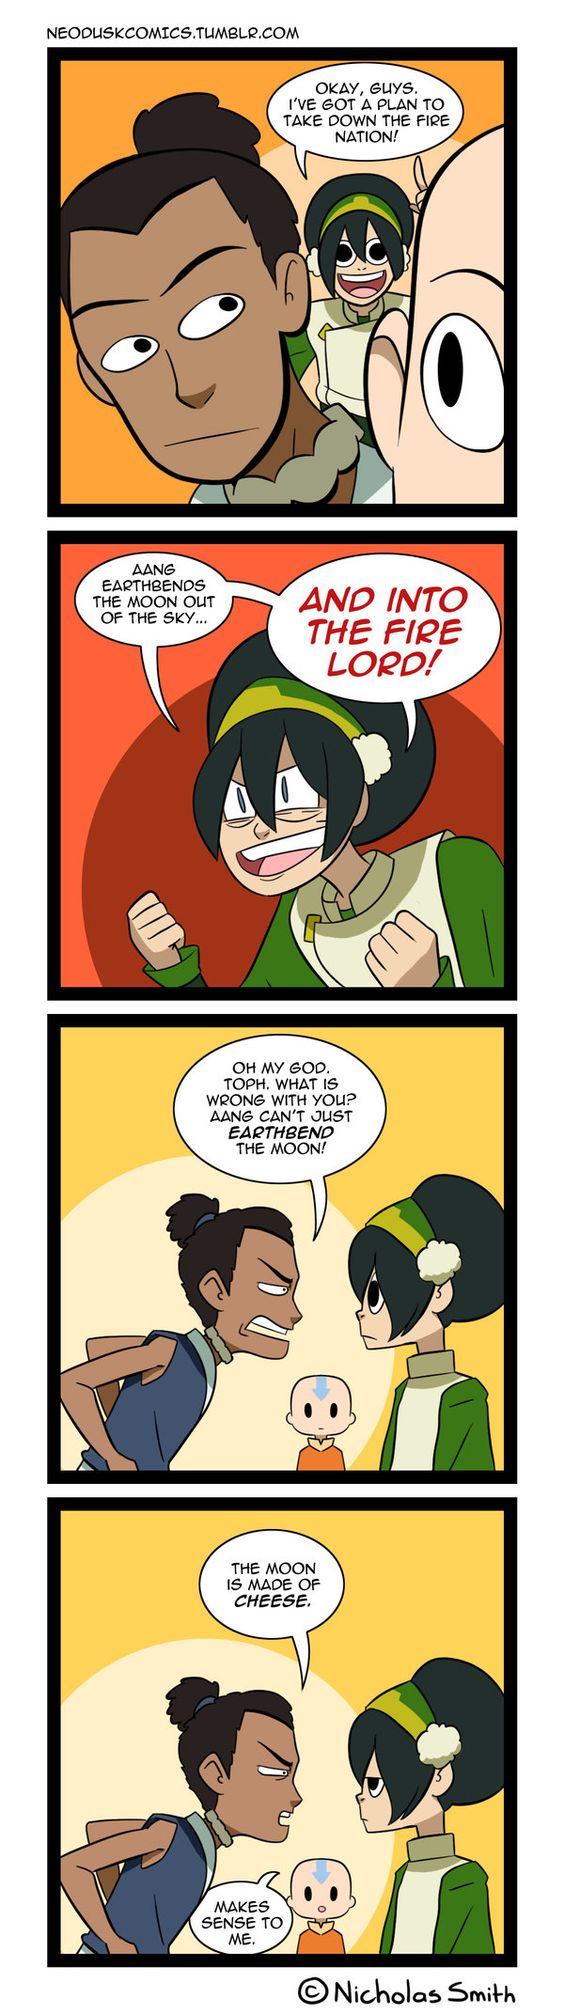 Fandumb #102: They Dated So He Knows (Avatar) by Neodusk on DeviantArt